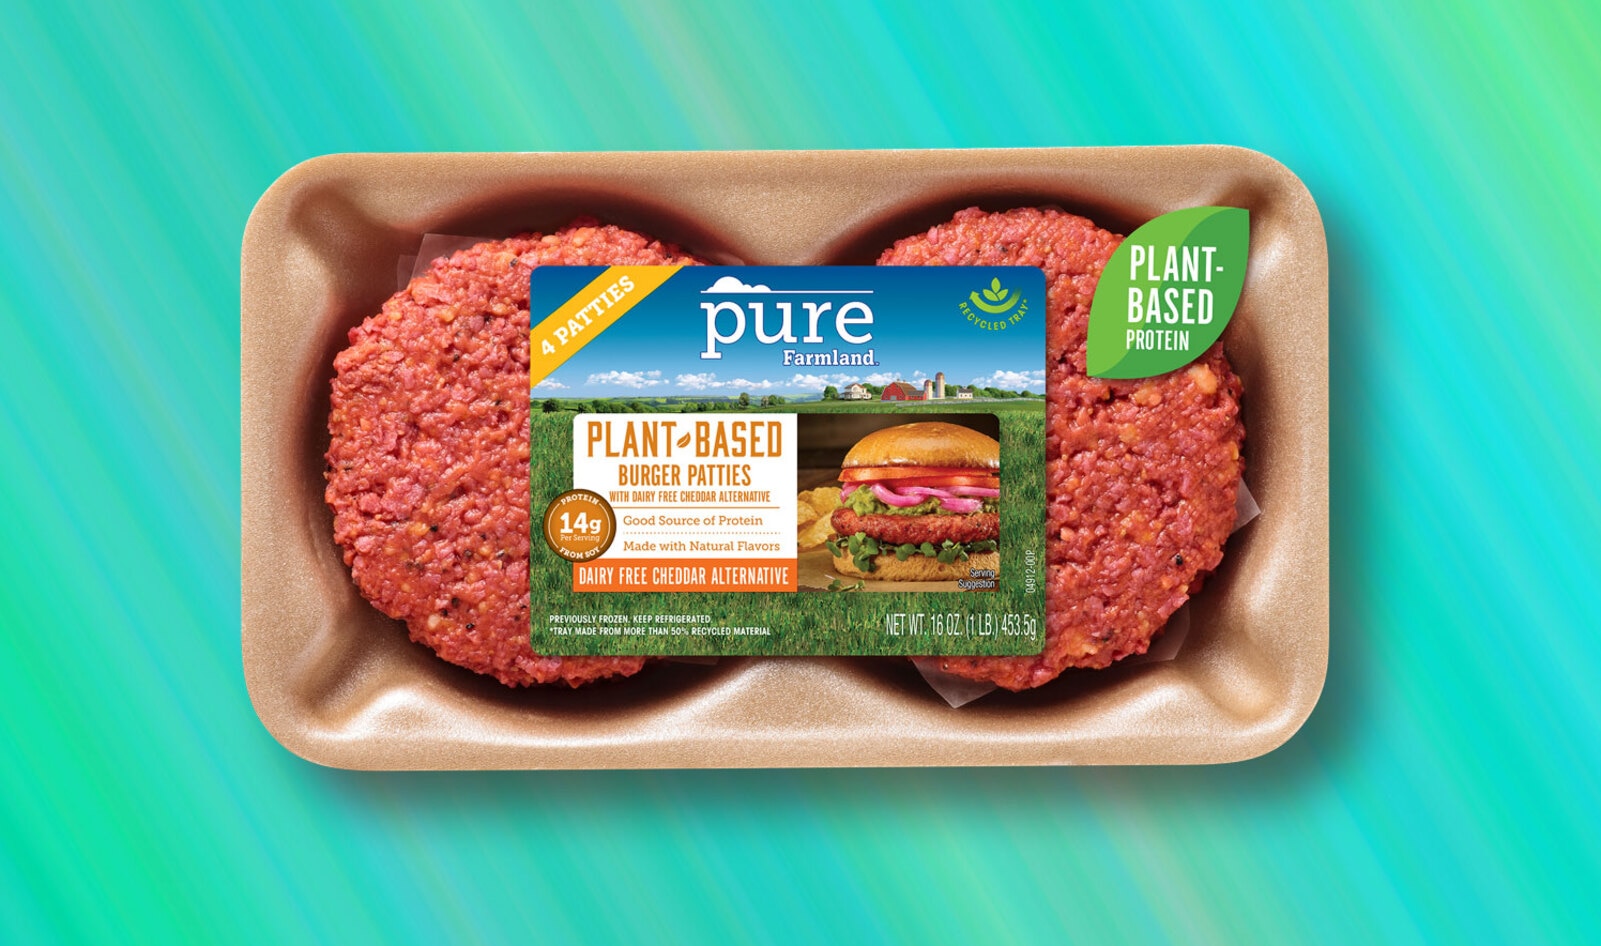 More Than Half of the World’s Largest Food Companies Are Working to Advance Plant-Based Options